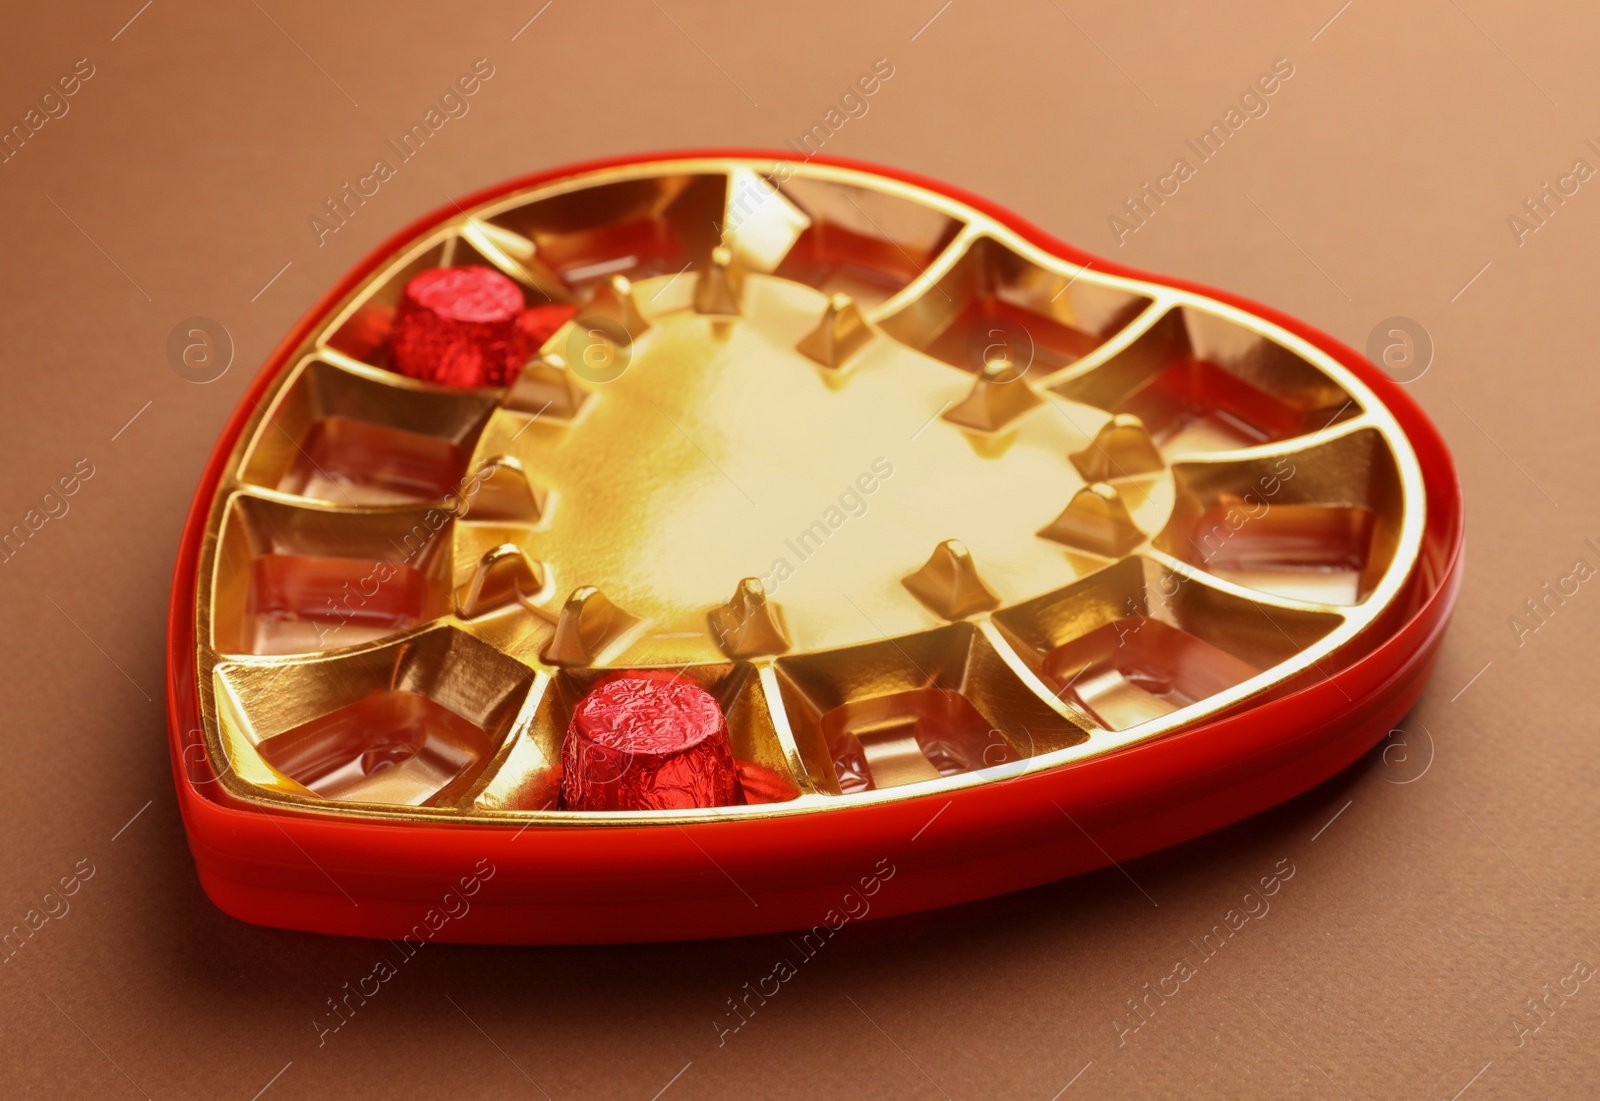 Photo of Partially empty heart shaped box of chocolate candies on brown background